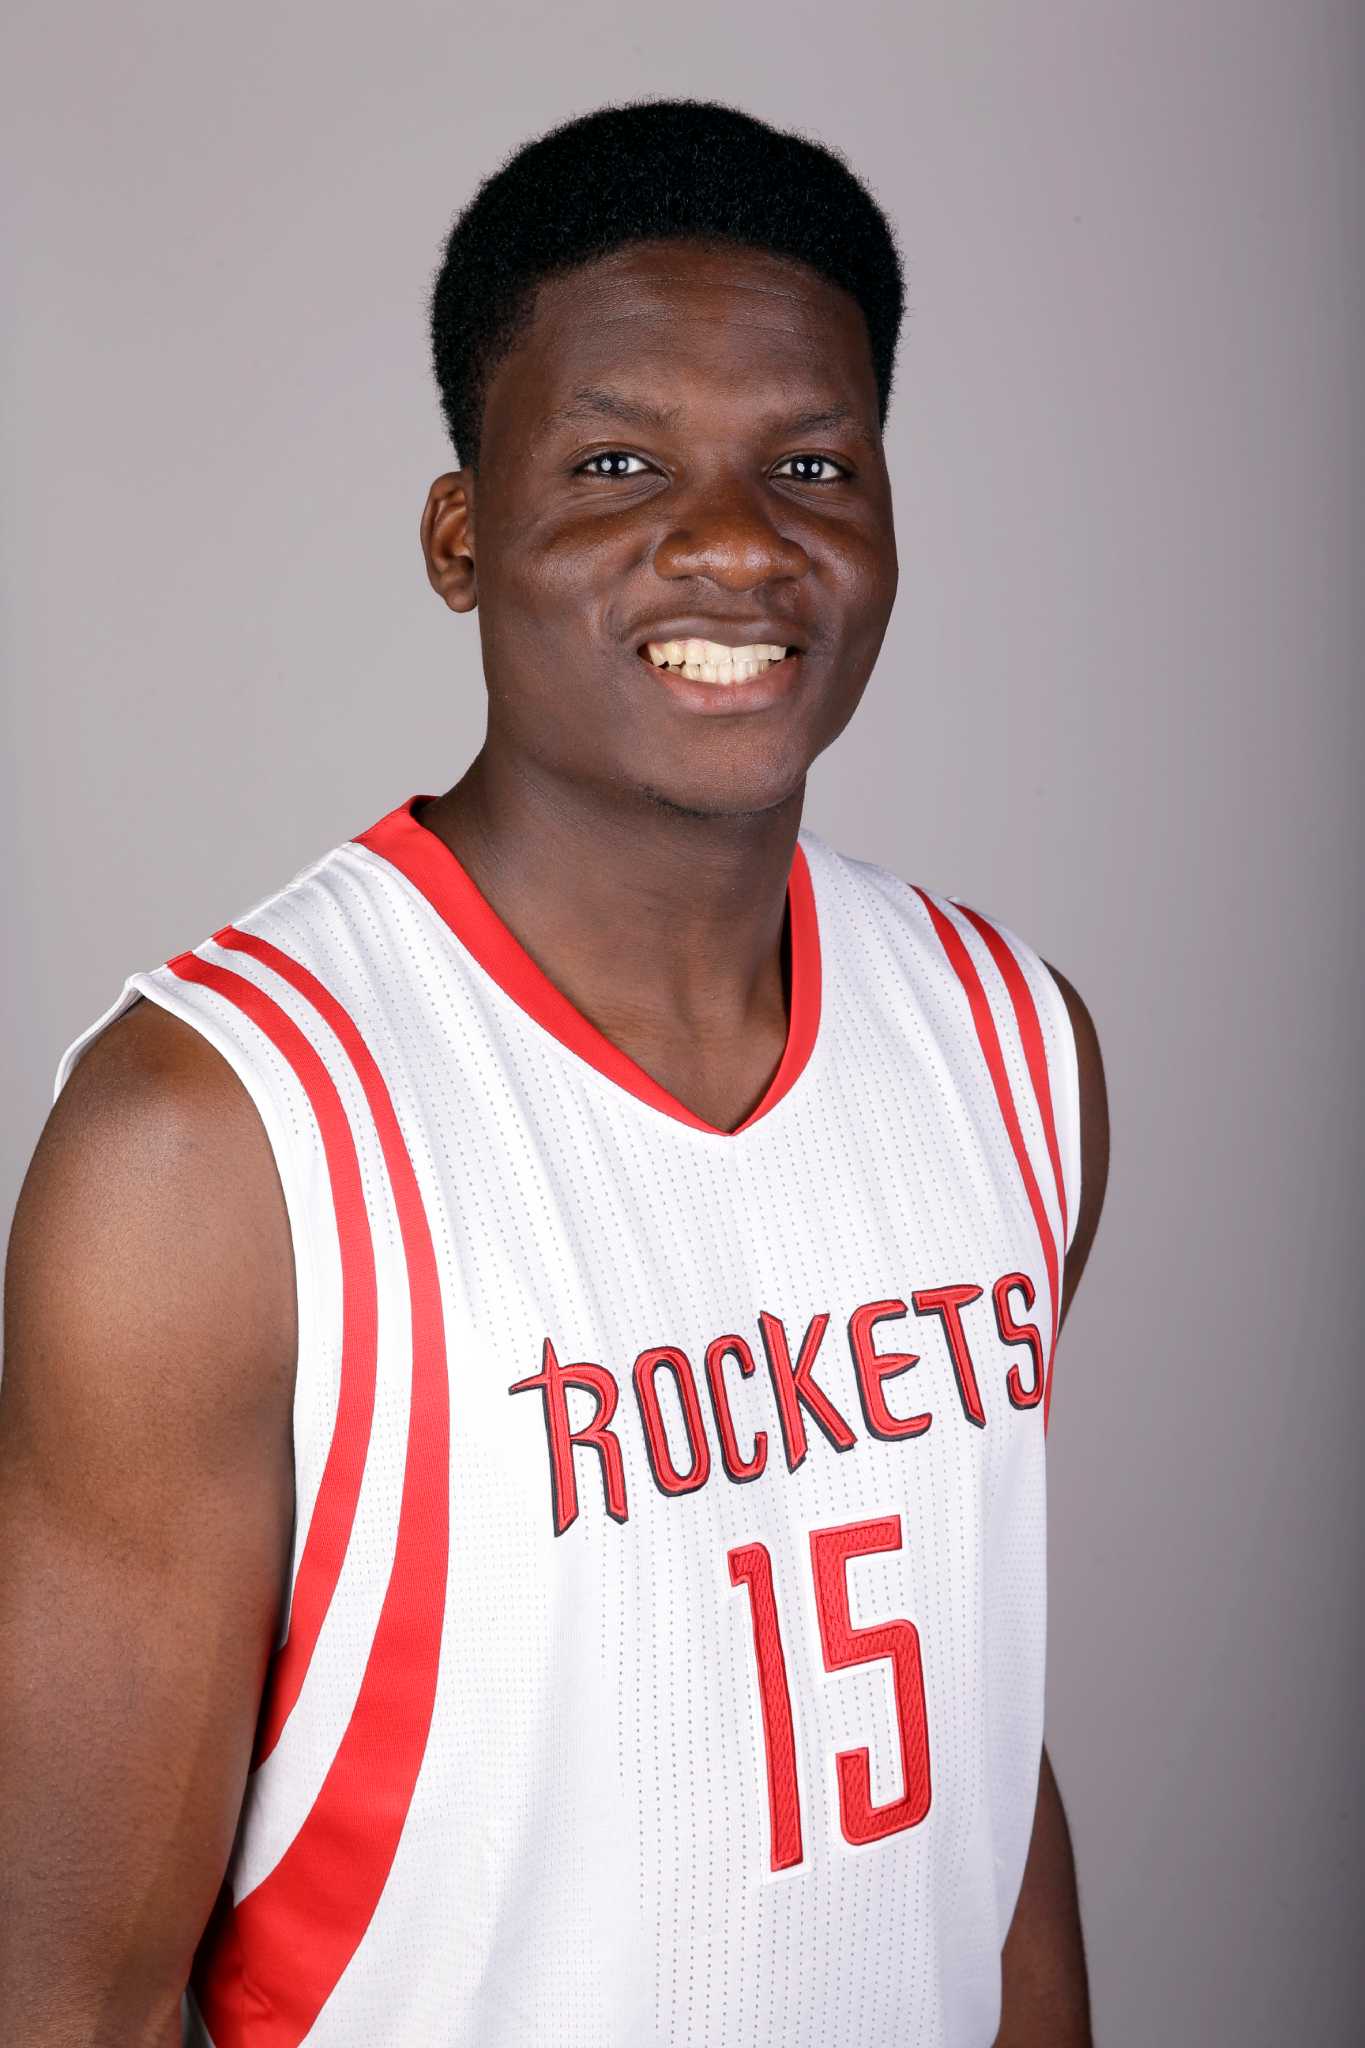 Growth spurt leads Rockets draftee Capela in new direction